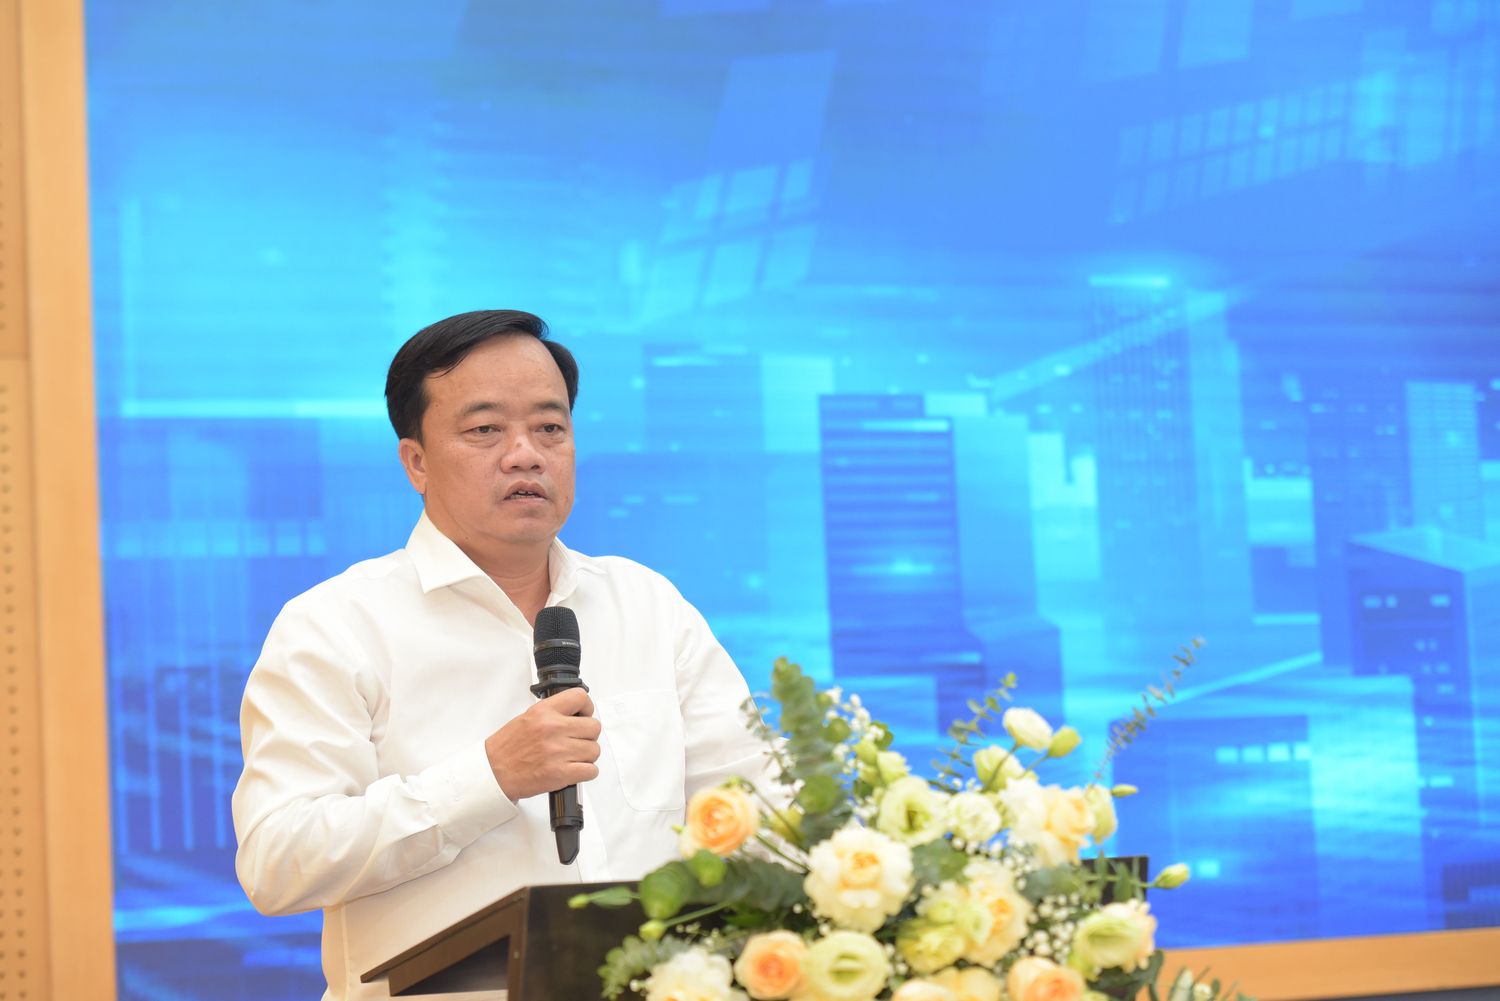 Mr. Huynh Quoc Viet, Alternate Member of the Central Party Executive Committee, Deputy Secretary of the Provincial Party Committee, and Chairman of the People's Committee of Ca Mau Province, made a statement at the event.